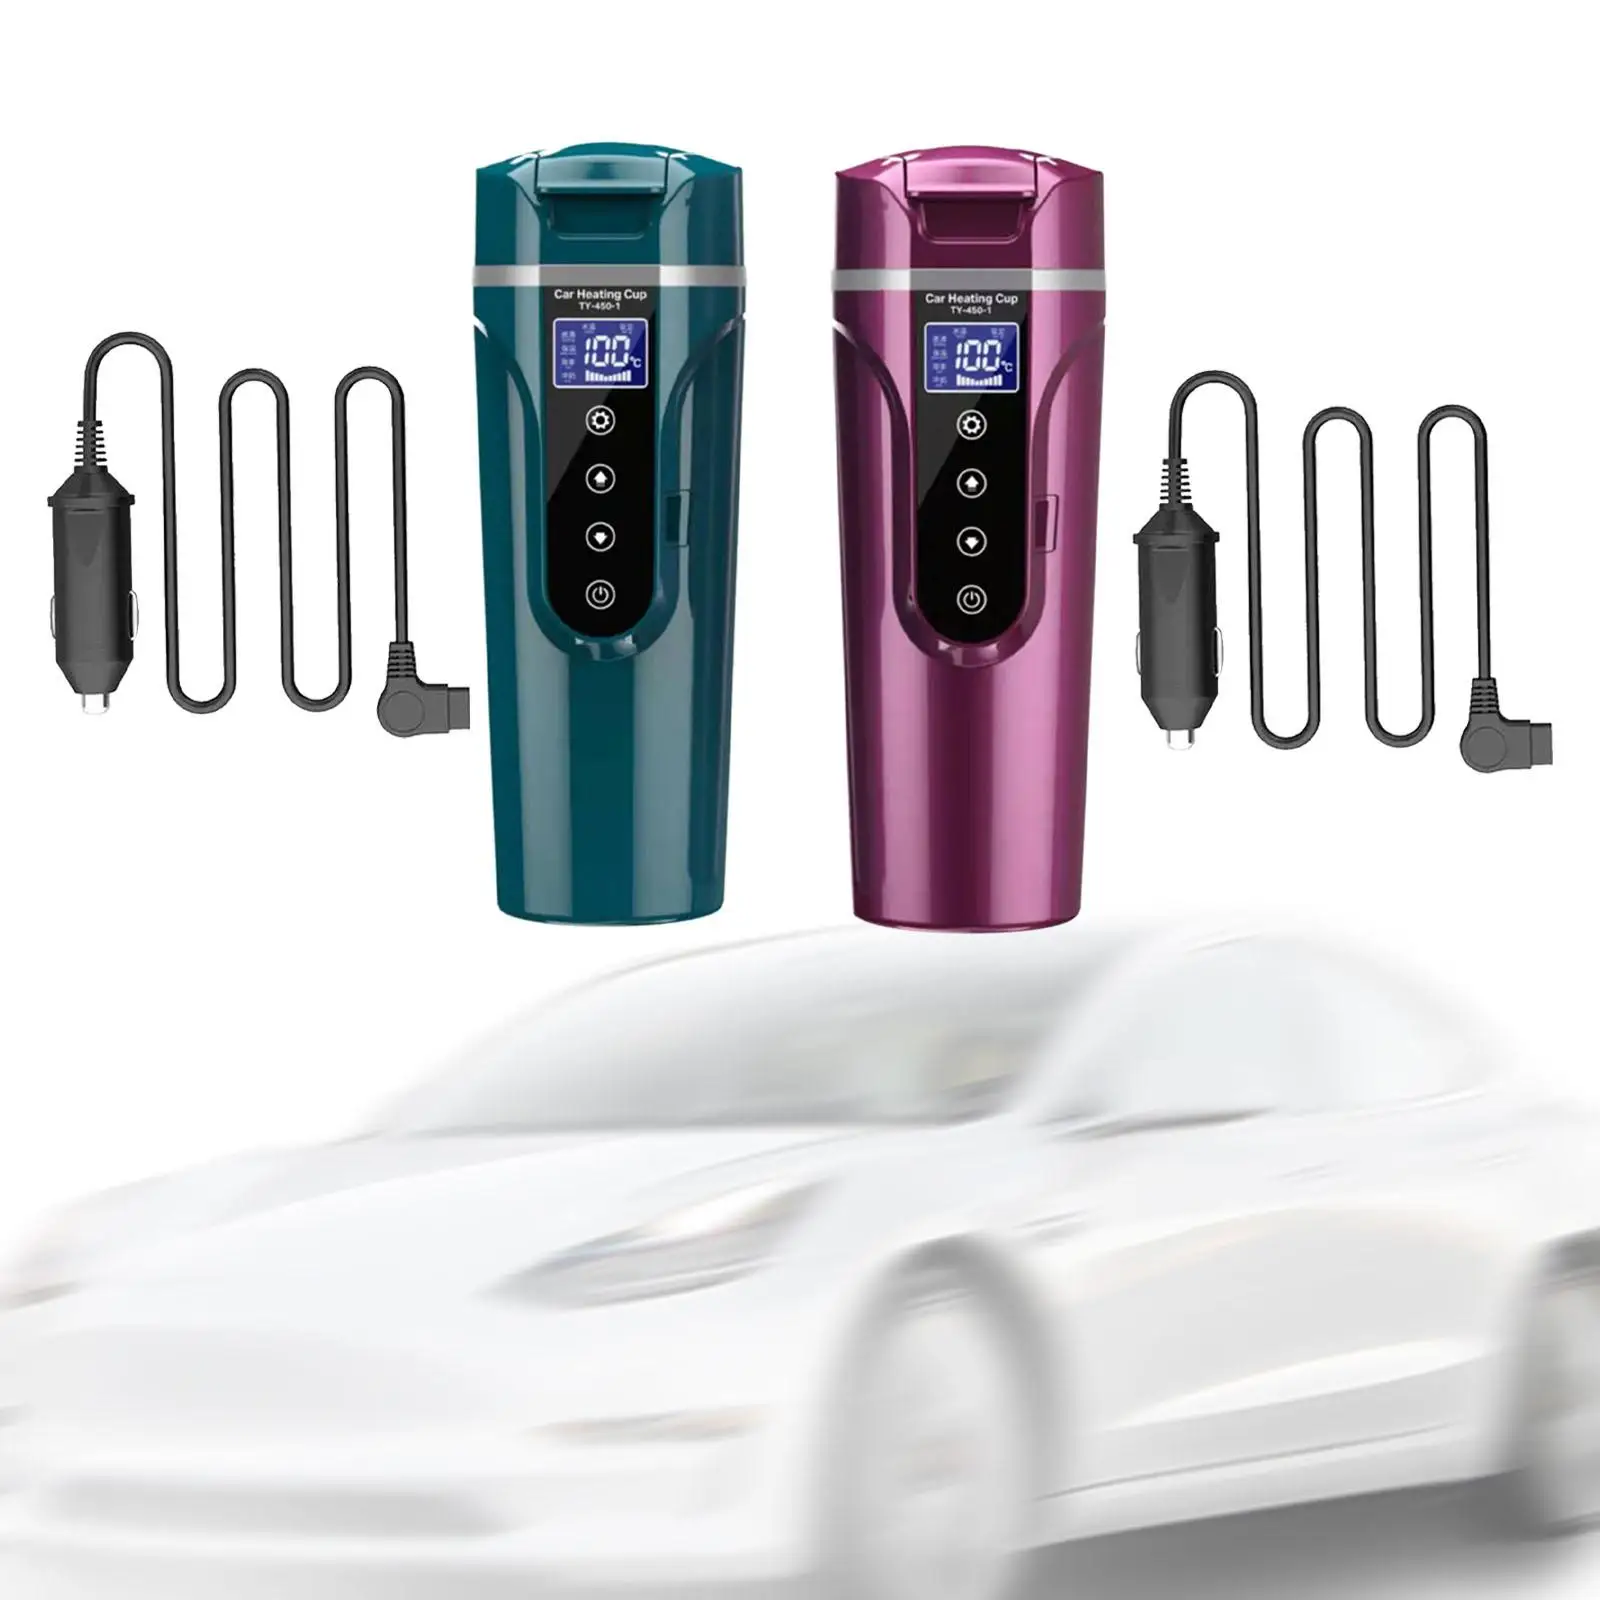 Car Heating Cup Fast Boiling Leakproof 12V/24V Travel Car Truck Kettle Car Travel Kettle Water Boiler for Tea Water Coffee Car